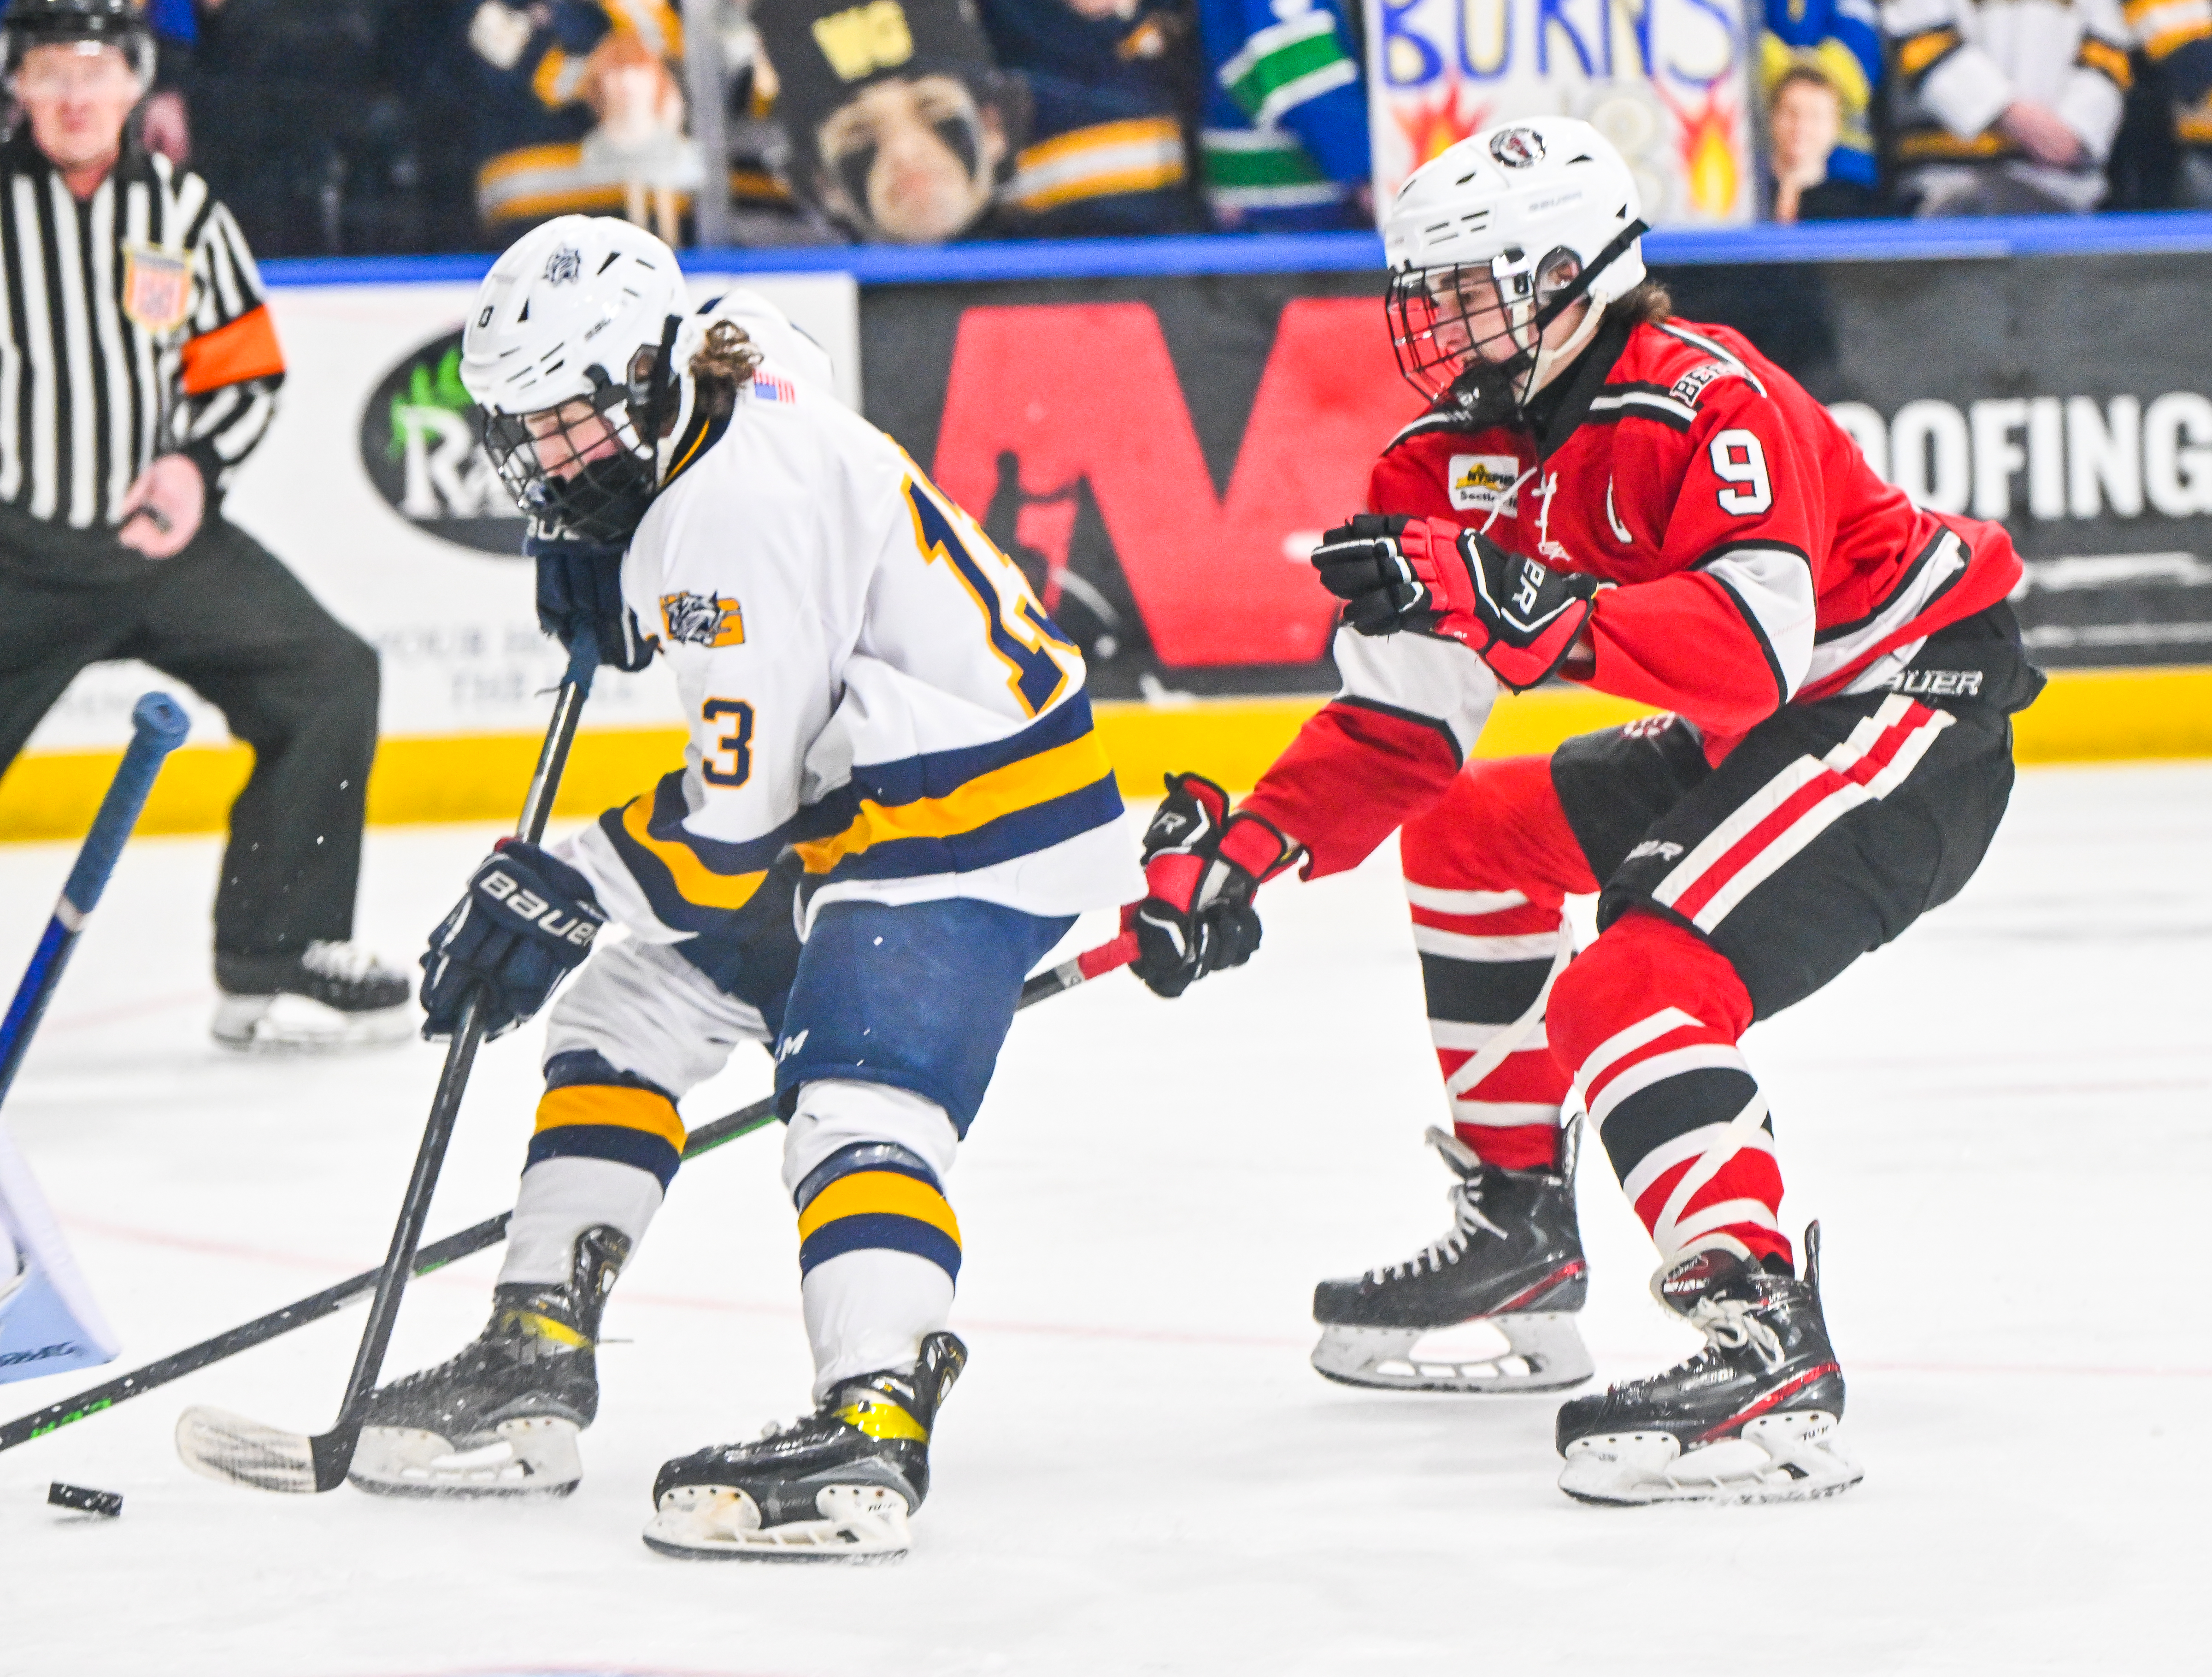 Preview of the 2022 NYSPHSAA Boys Ice Hockey Championships - New York State  Public High School Athletic Association